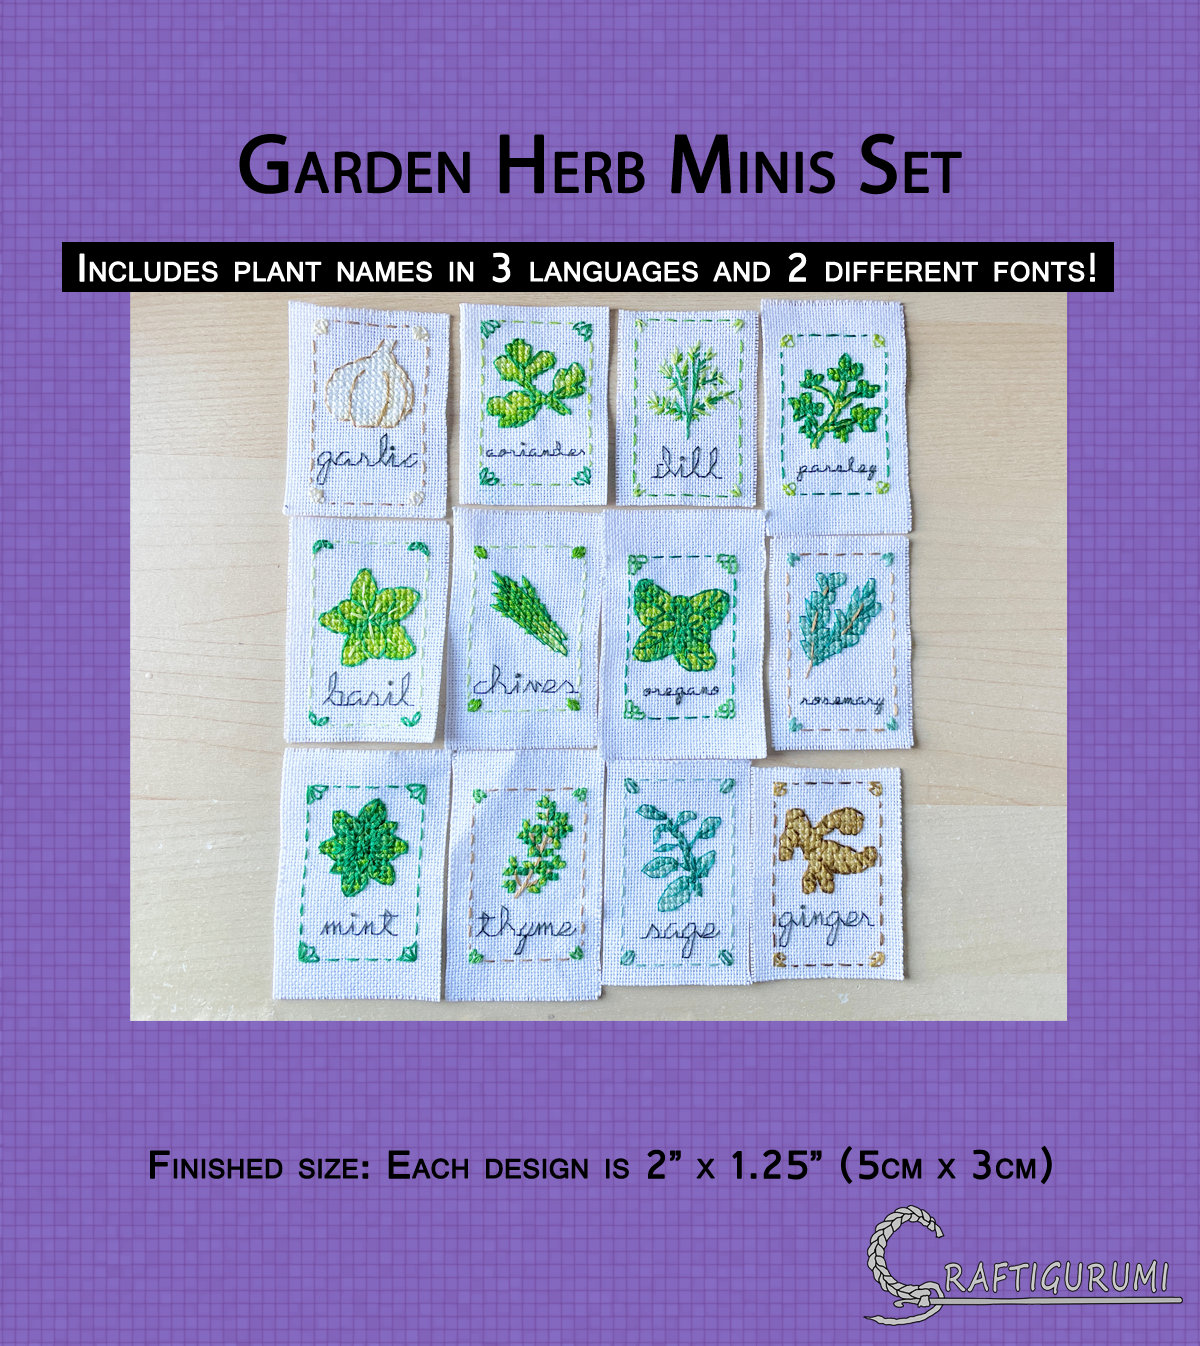 Magical Properties of Herbs PDF Cross Stitch Embroidery Pattern